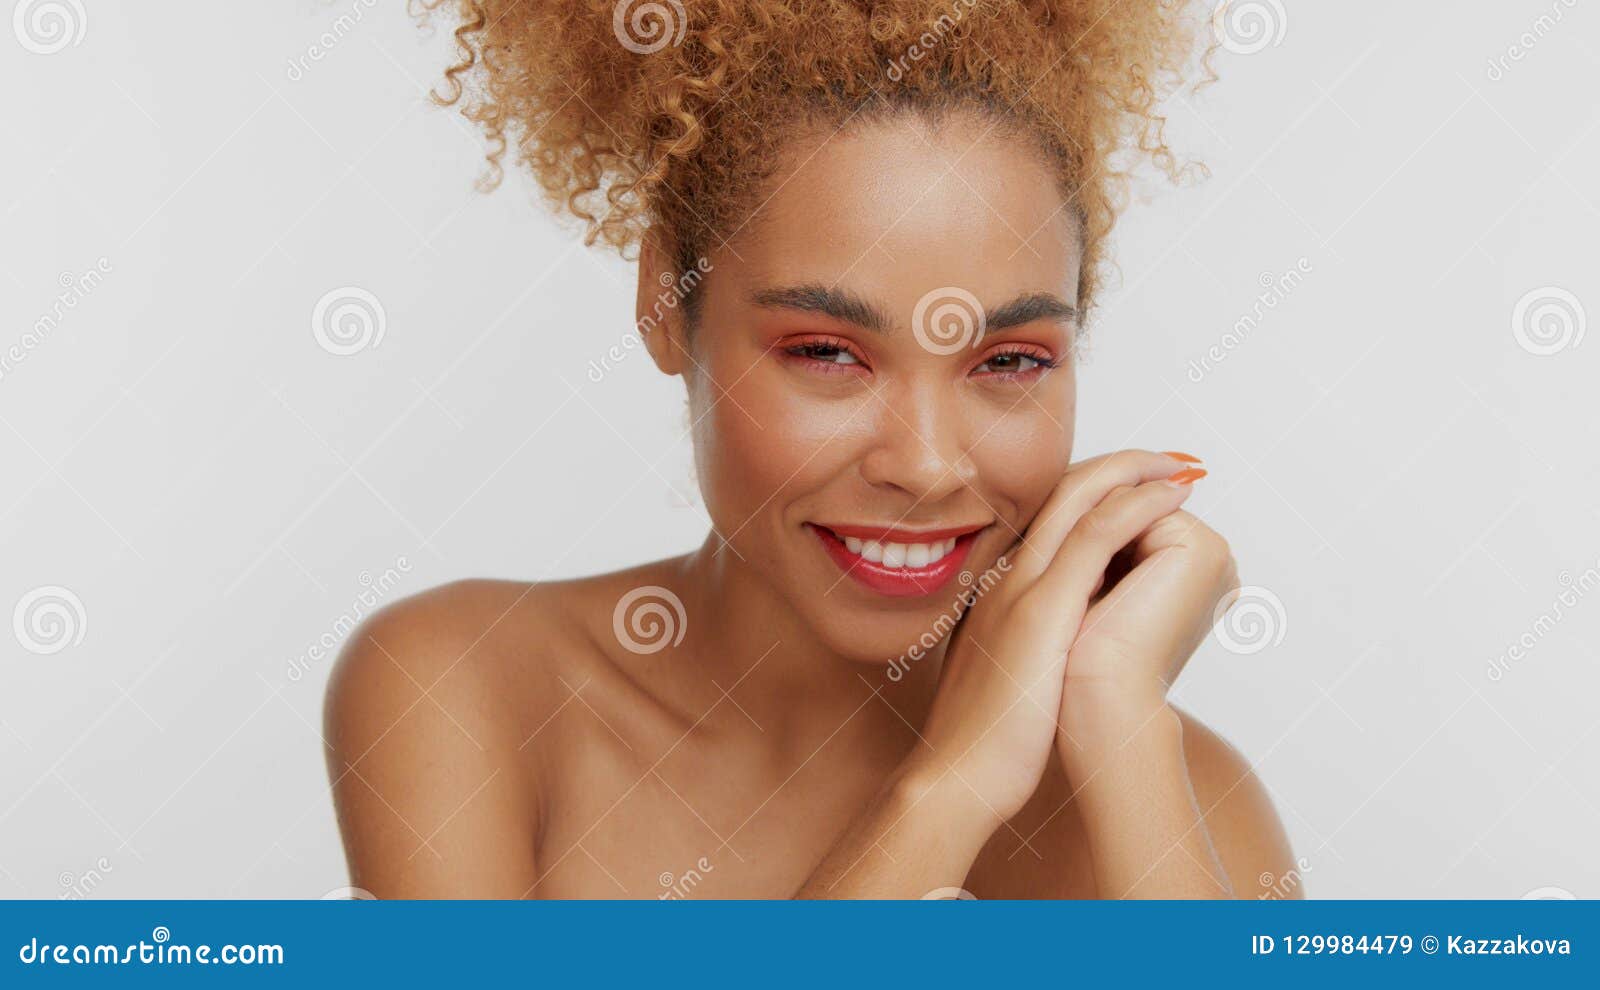 Mixed Race Black Blonde Model With Curly Hair Stock Image Image